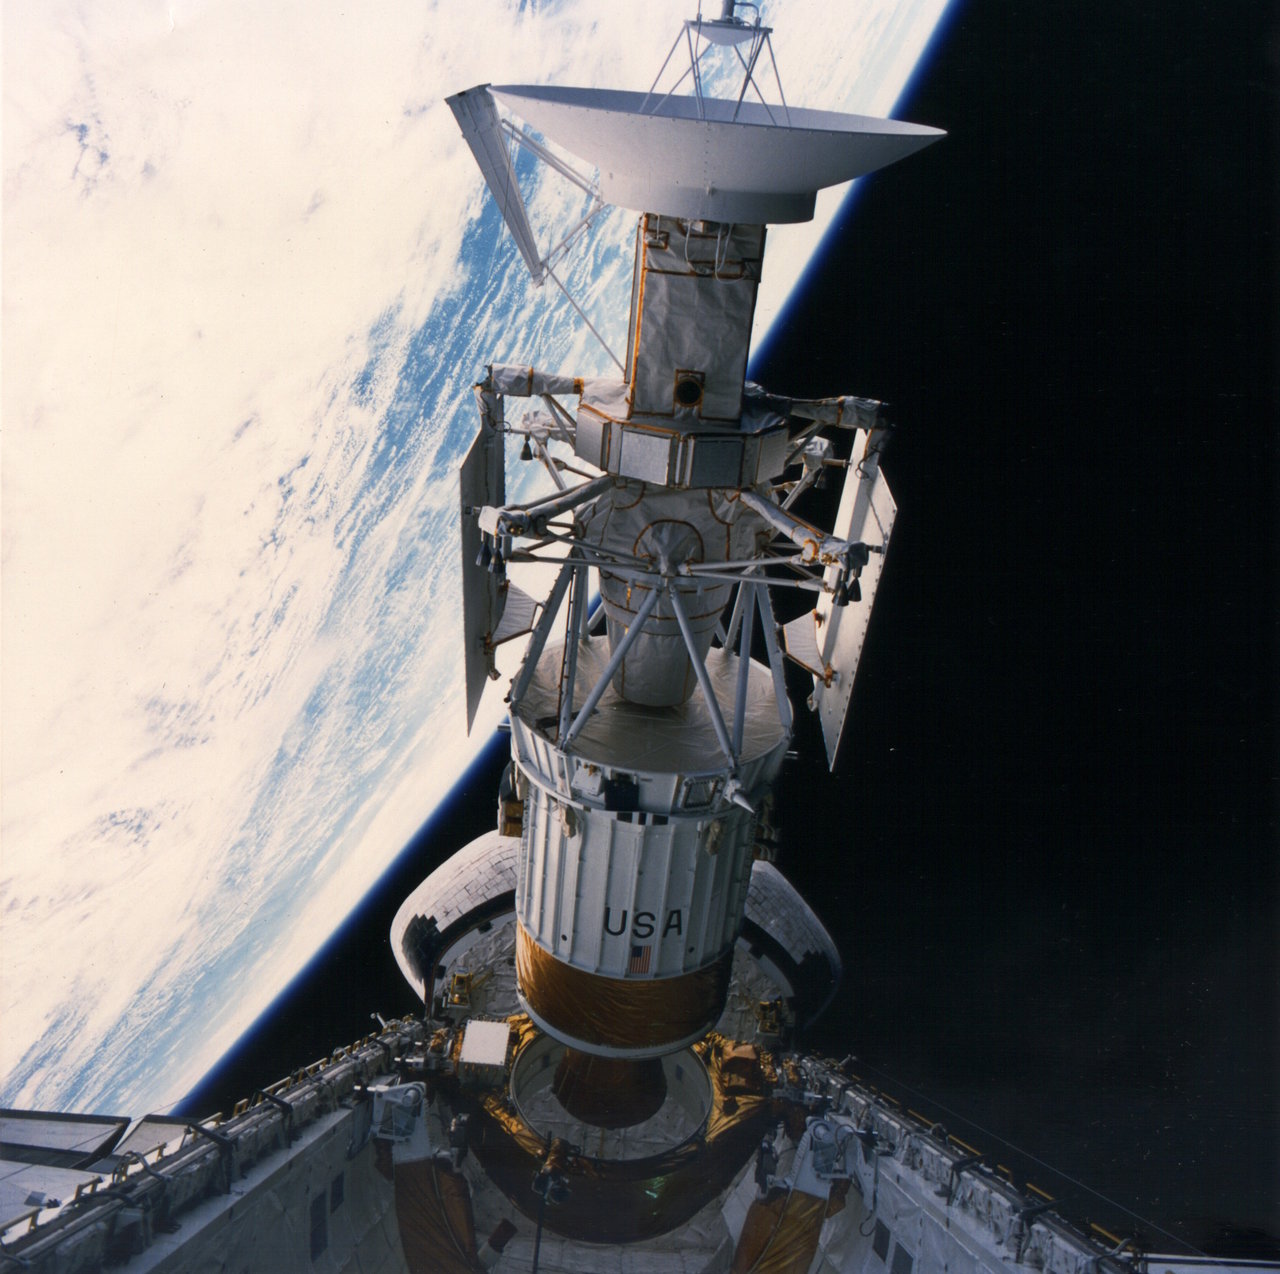 A long cylindrical spacecraft with an antenna dish on one end emerges from the cargo bay of the Space Shuttle.